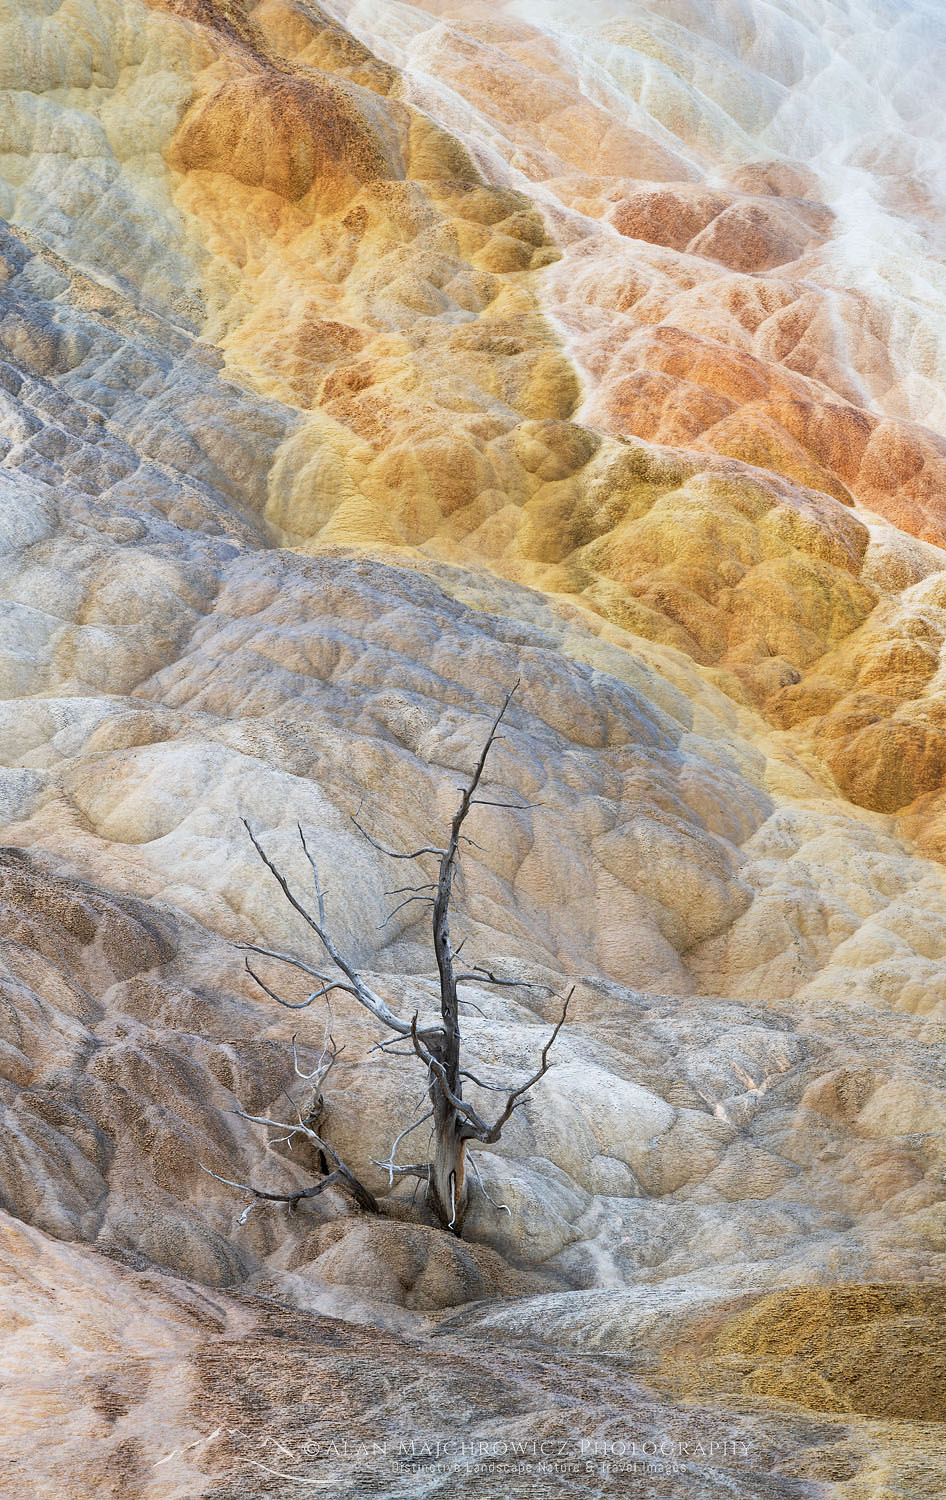 Dead trees entombed in travertine deposits colored by thermophilic bacteria. Upper Terraces of Mammoth Hot Springs, Yellowstone National Park #68060